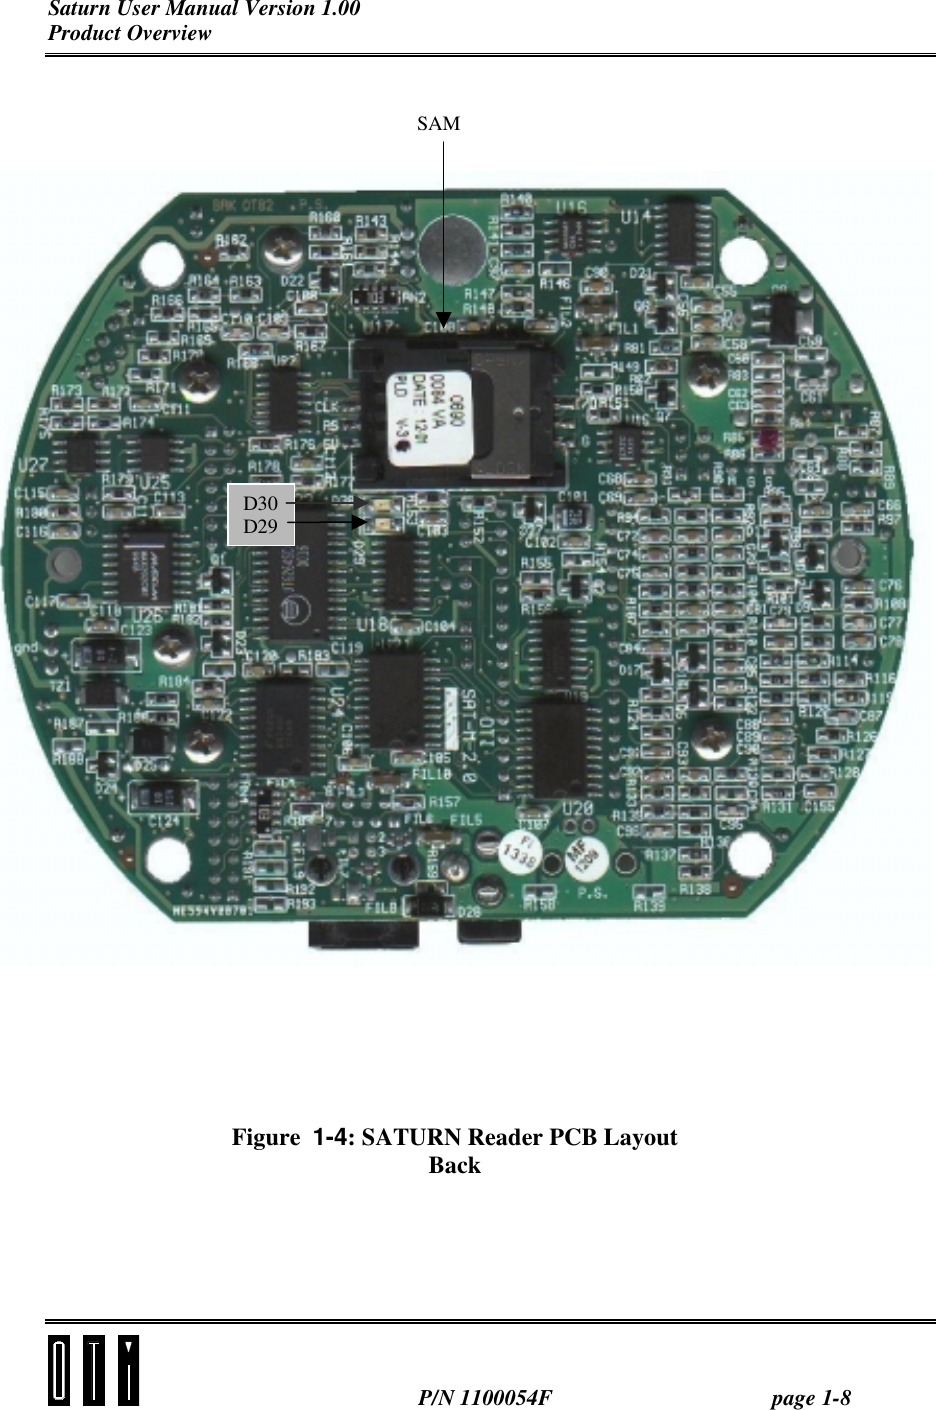 Saturn User Manual Version 1.00 Product Overview  P/N 1100054F page 1-8     Figure  1-4: SATURN Reader PCB Layout Back  D30 D29 SAM 